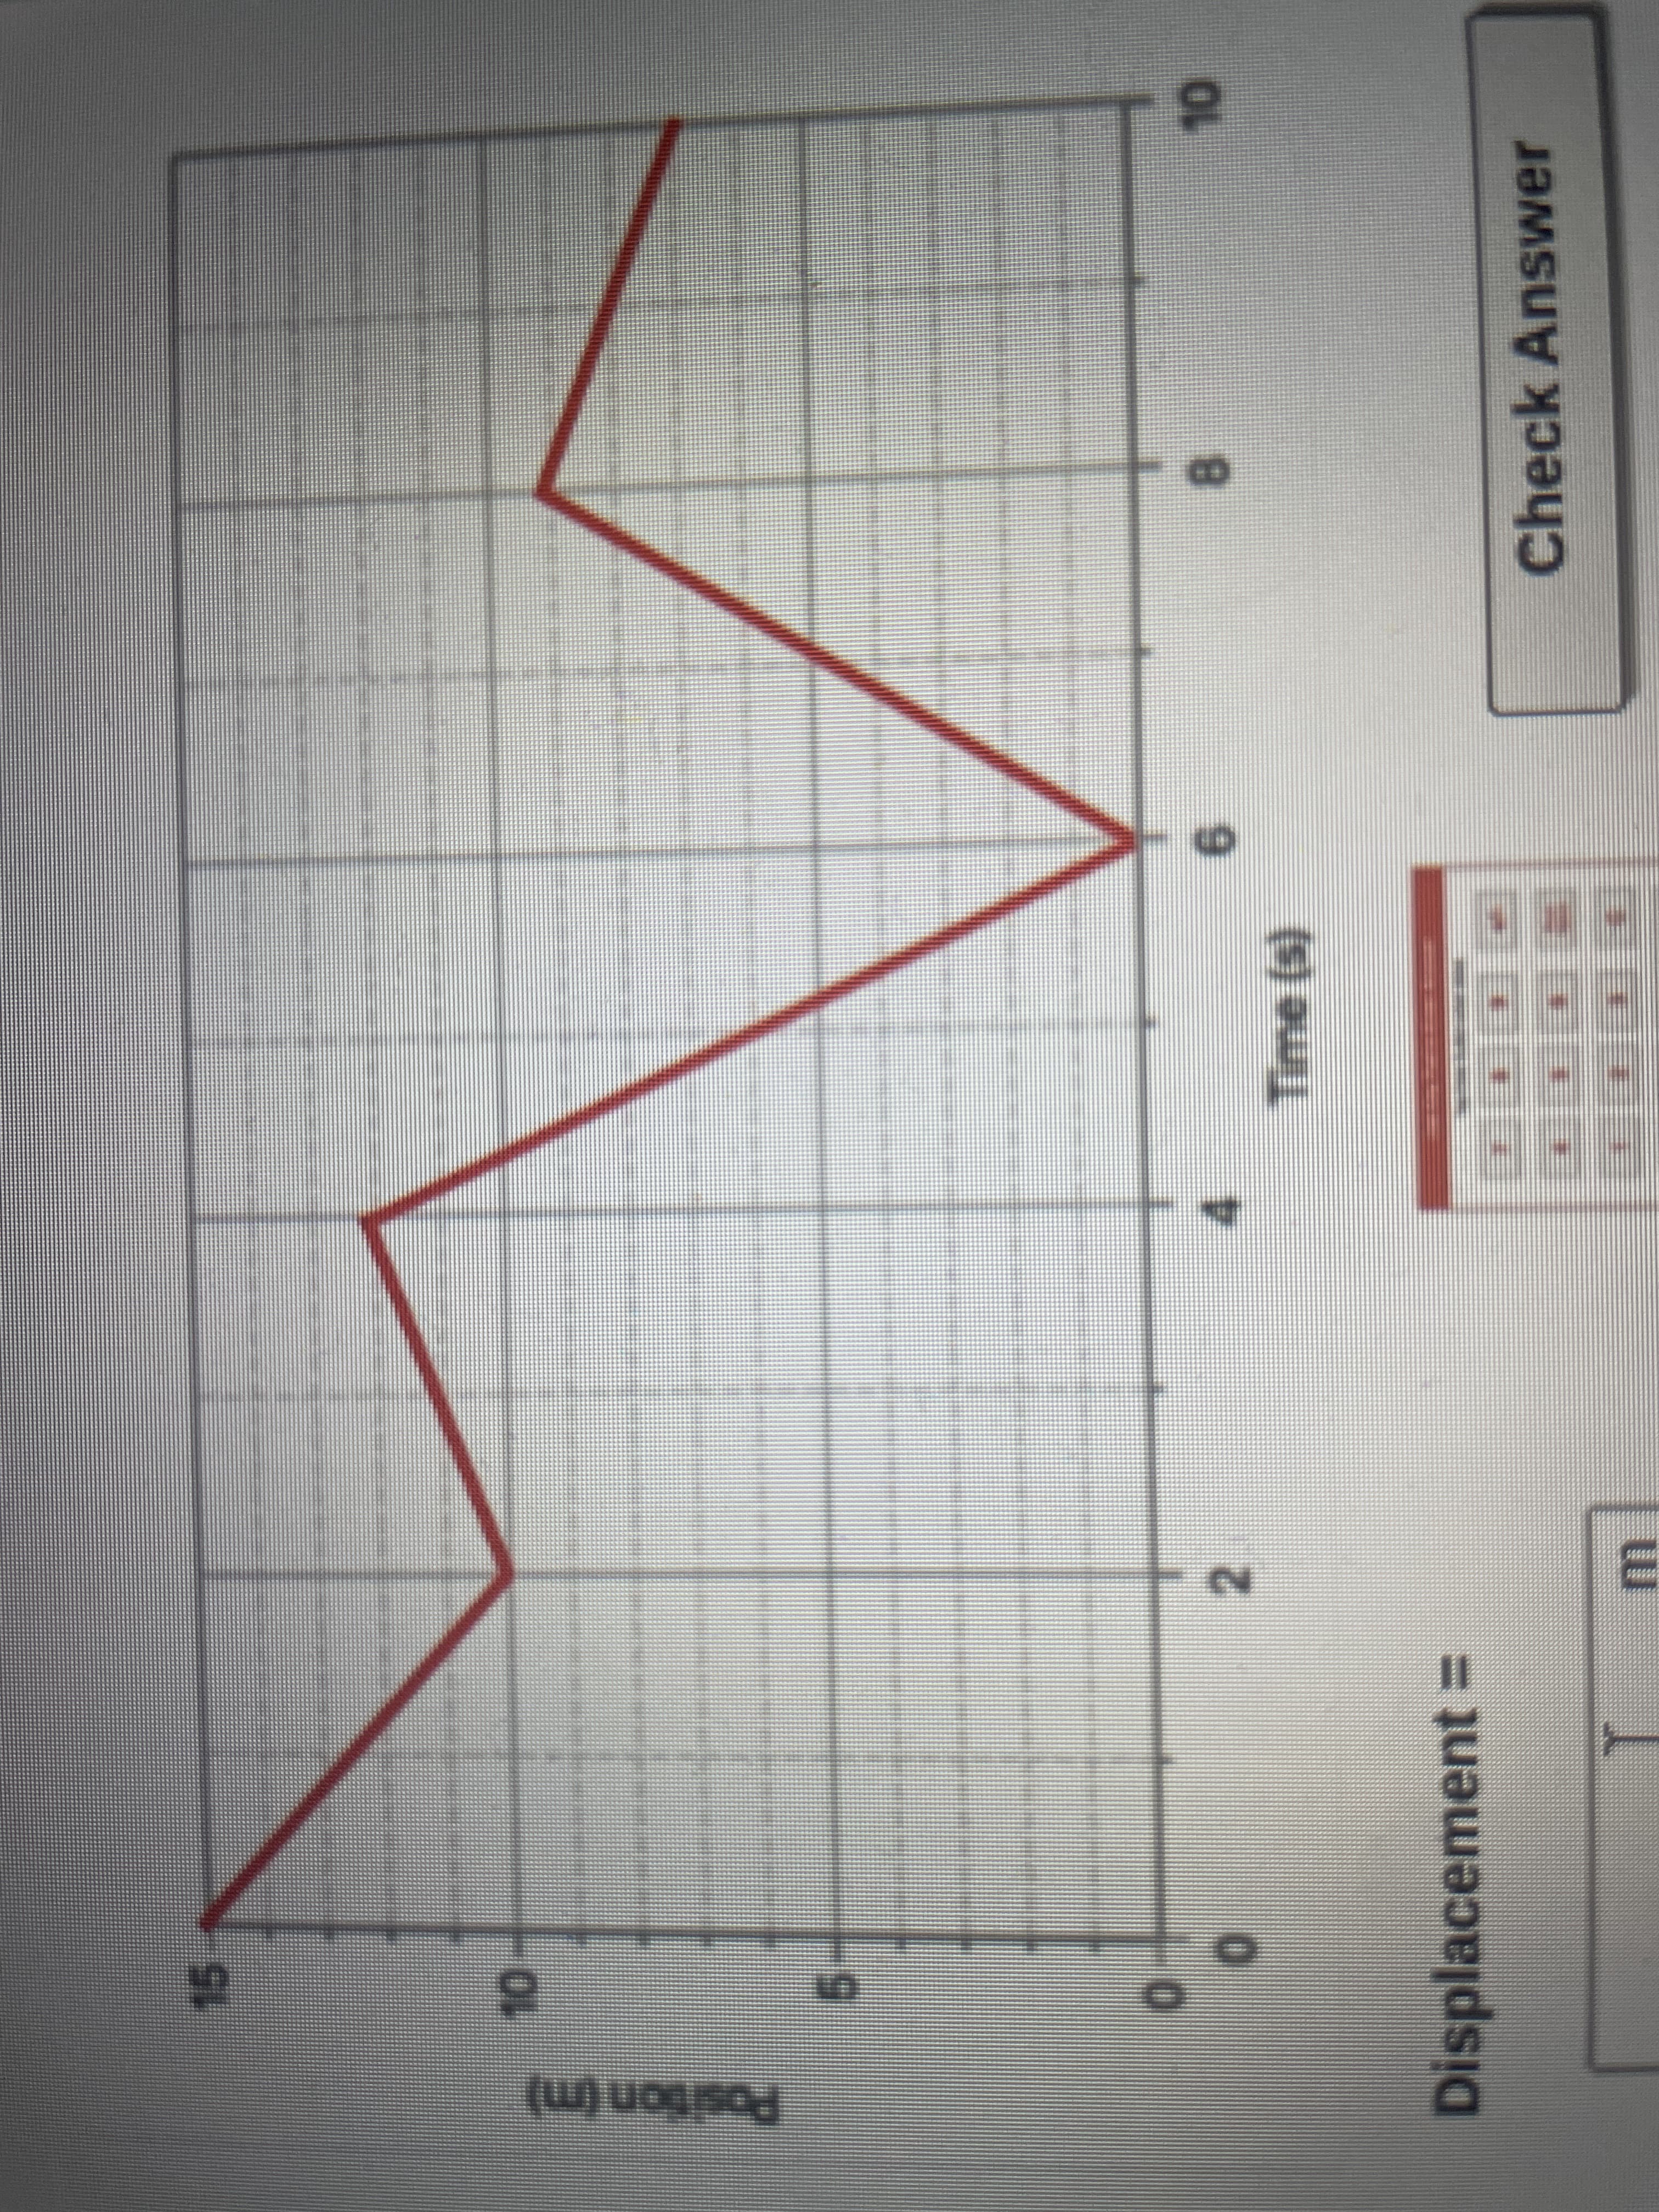 Check Answer
Displacement =
2.
4.
8.
15
Position (m)
9.
